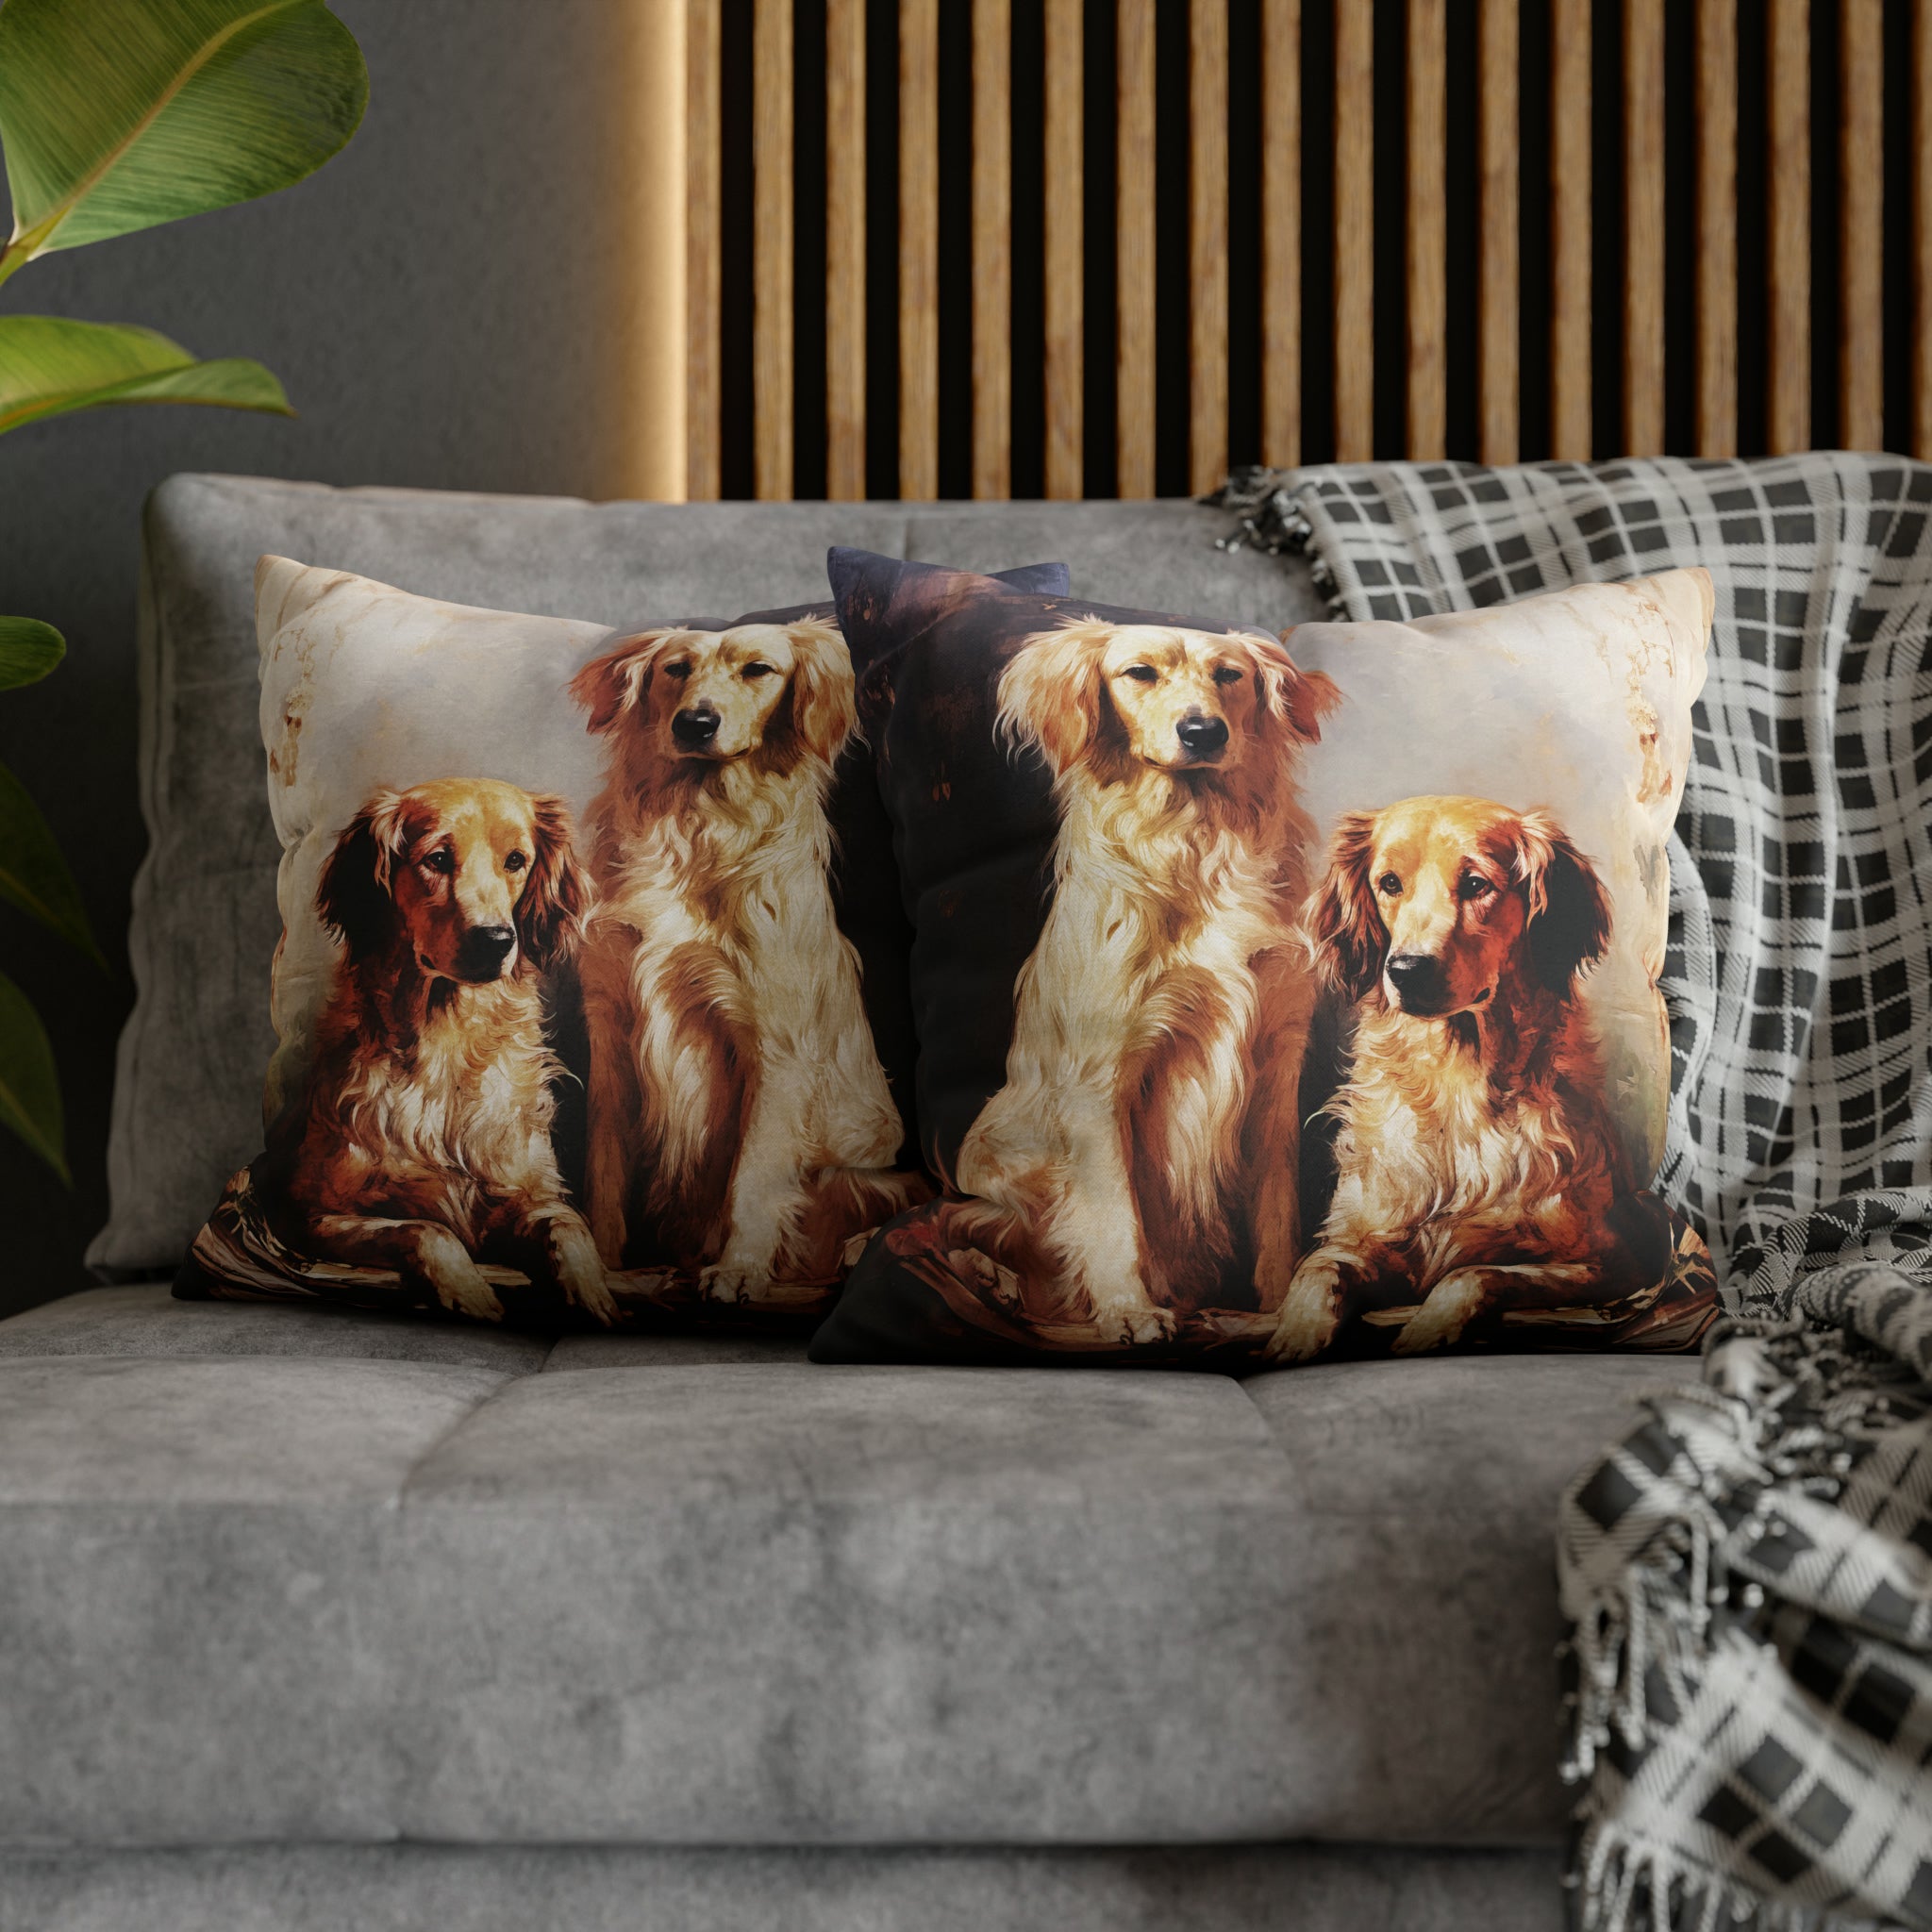 Square Pillow Case 18" x 18", CASE ONLY, no pillow form, original Art ,a Beautiful Painting of a Pair of Golden Retrievers